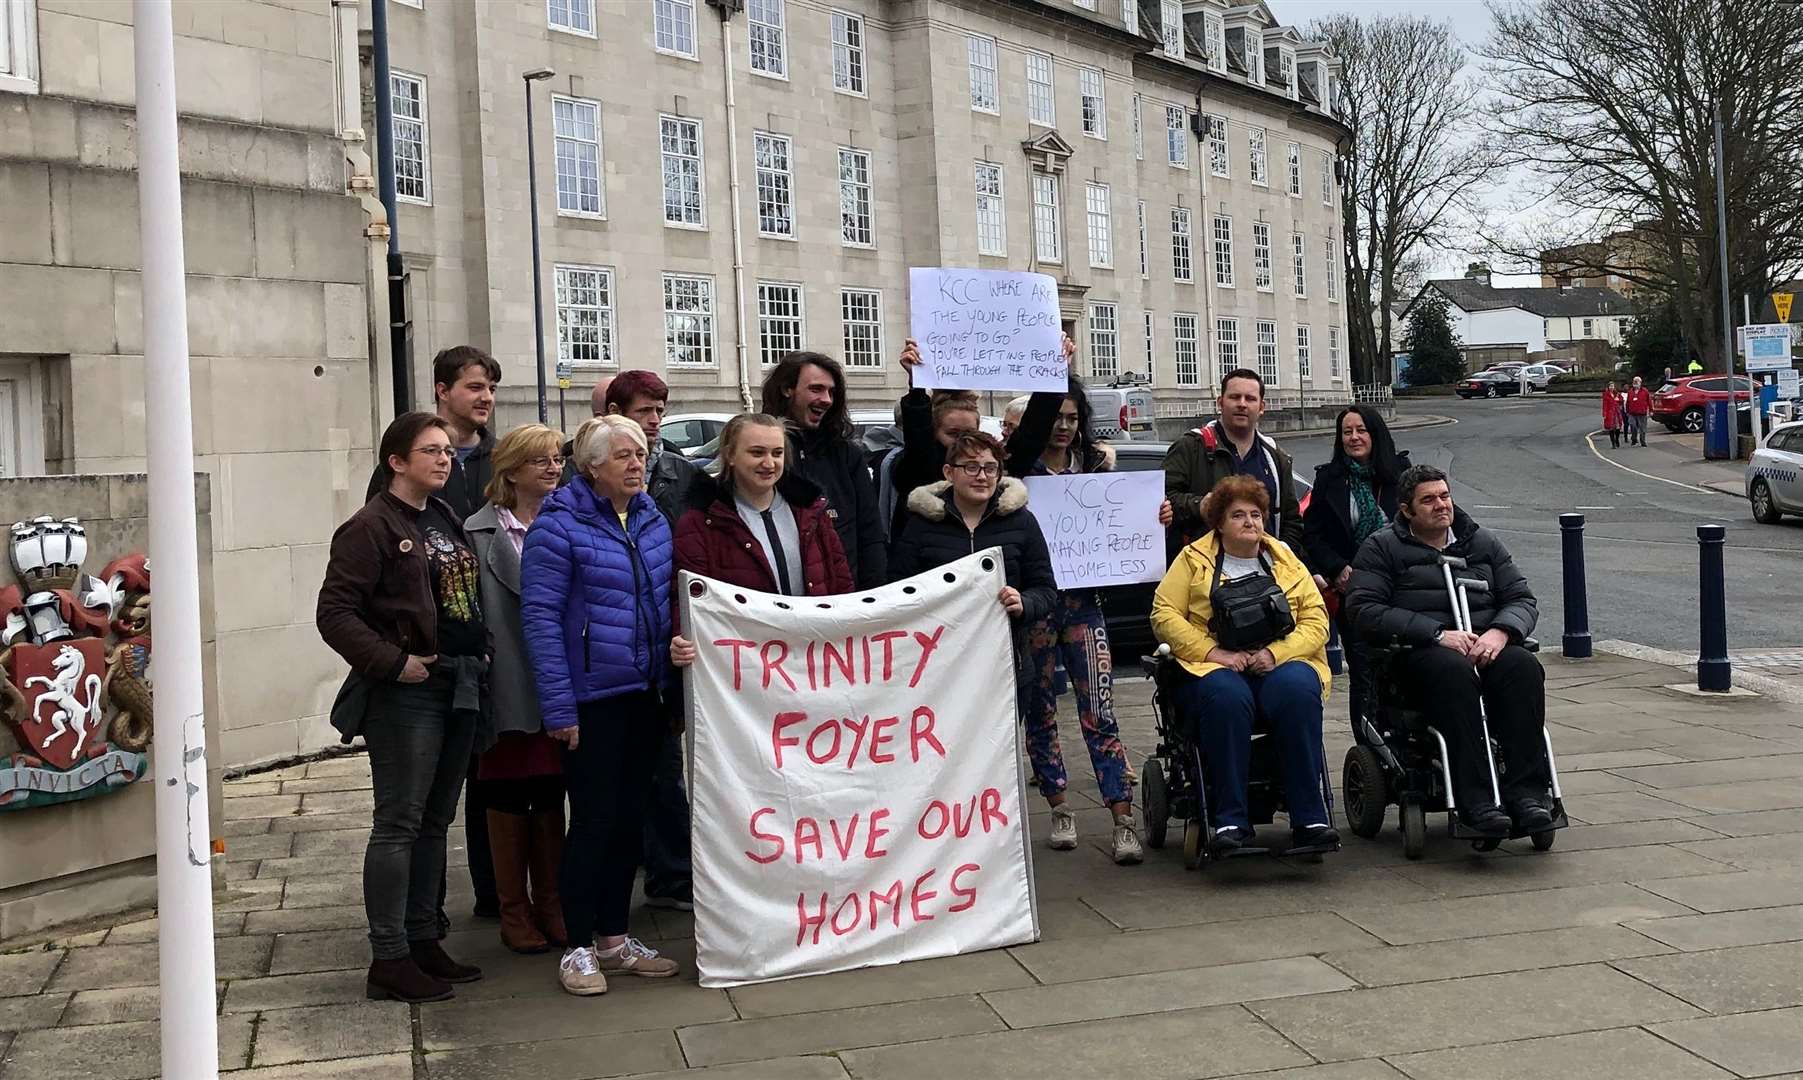 A protest against changes to accommodation services has taken place outside County Hall in Maidstone (7978328)